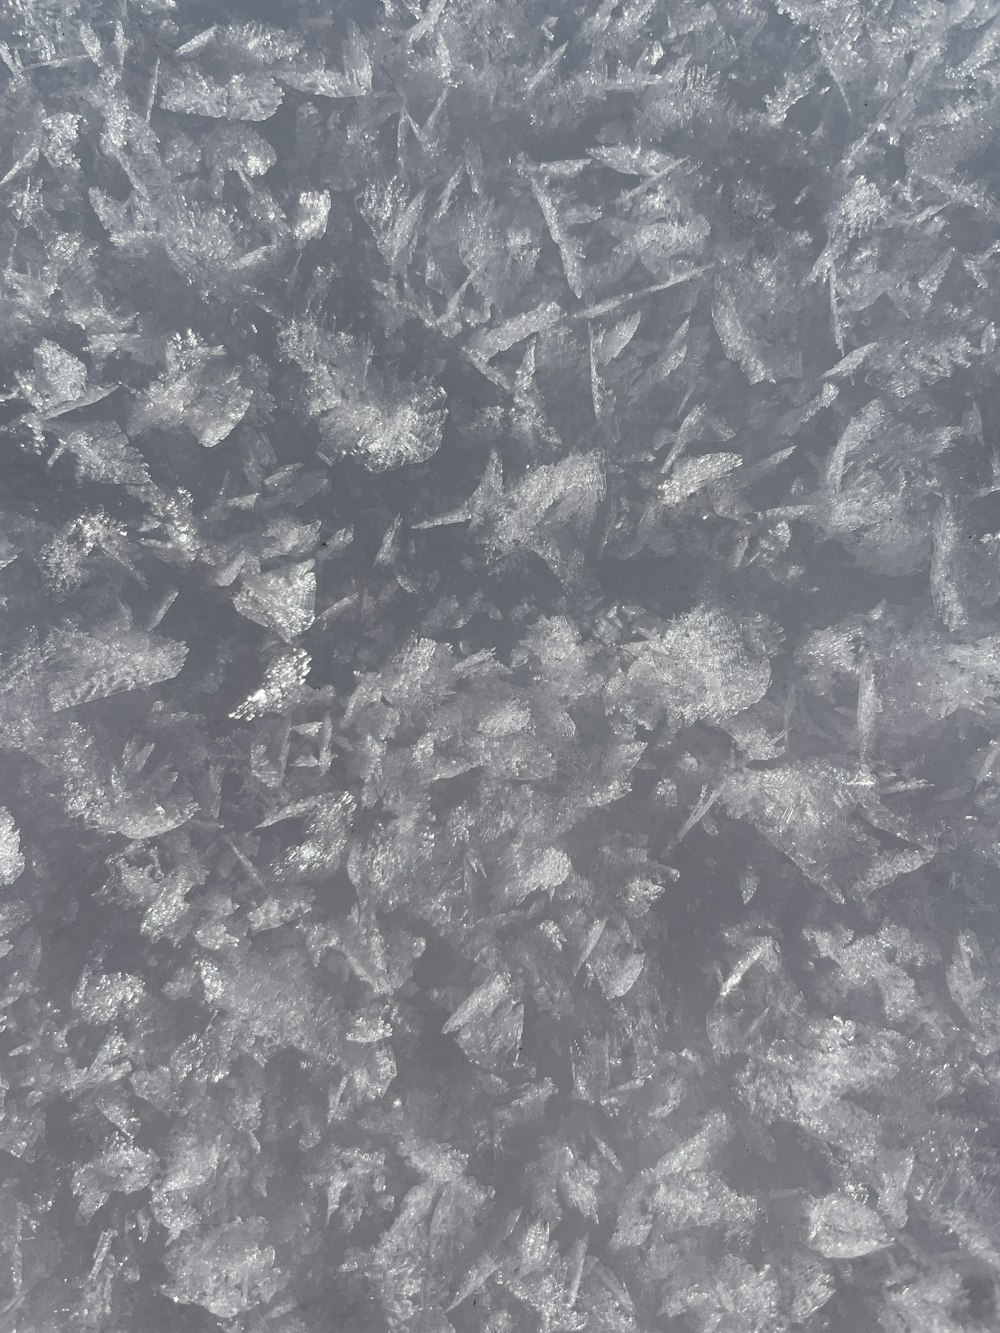 a close up view of a bunch of ice crystals